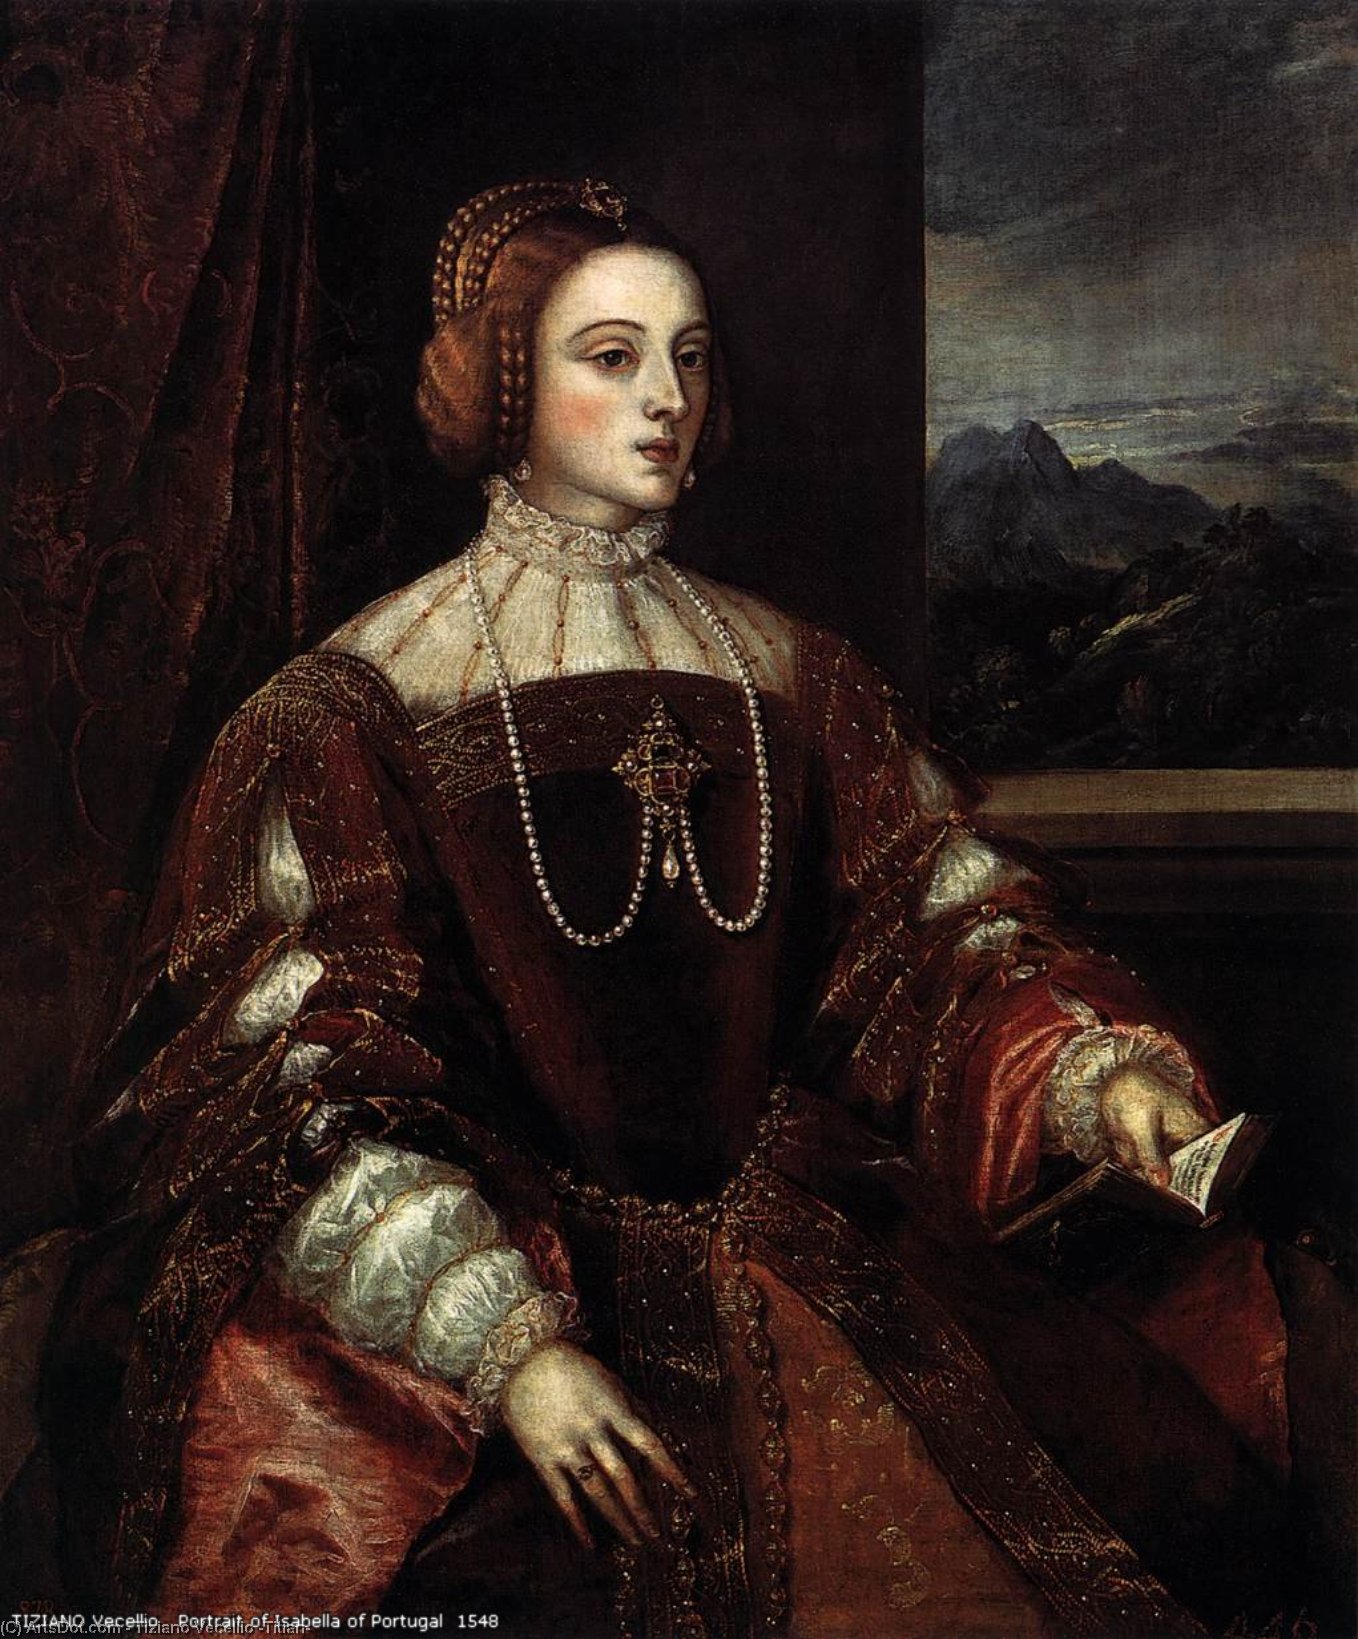 Buy Museum Art Reproductions Portrait of Isabella of Portugal, 1548 by Tiziano Vecellio (Titian) (1490-1576, Italy) | ArtsDot.com